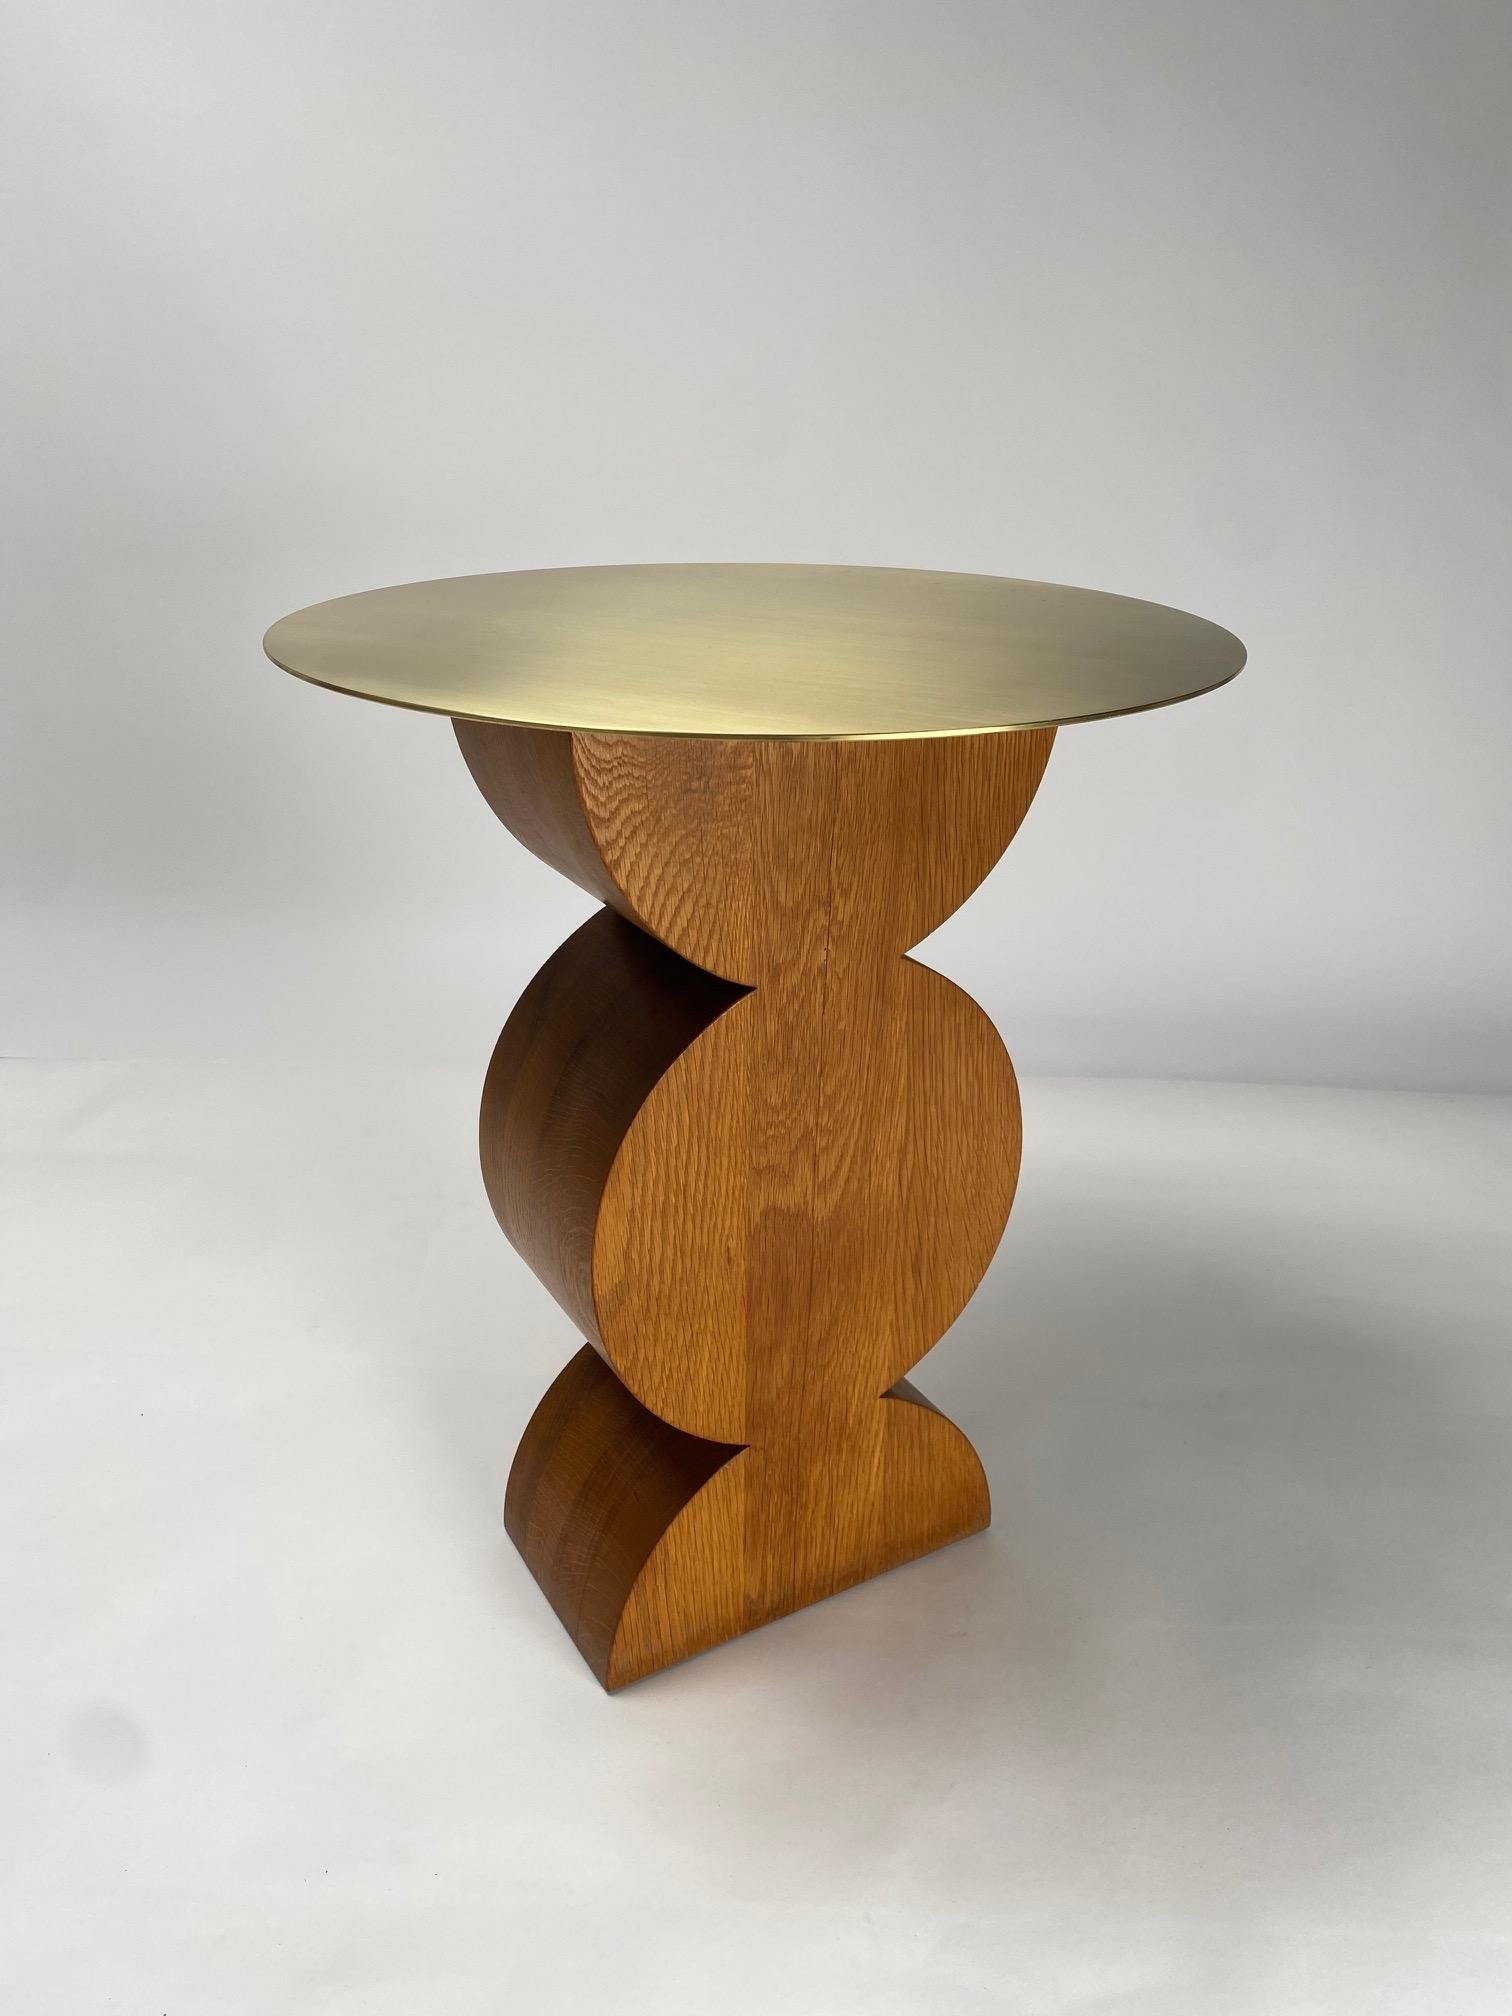 Constantin wood side table by Gavina, Homage to Brancusi, 1971 (First Edition) In Good Condition For Sale In Argelato, BO